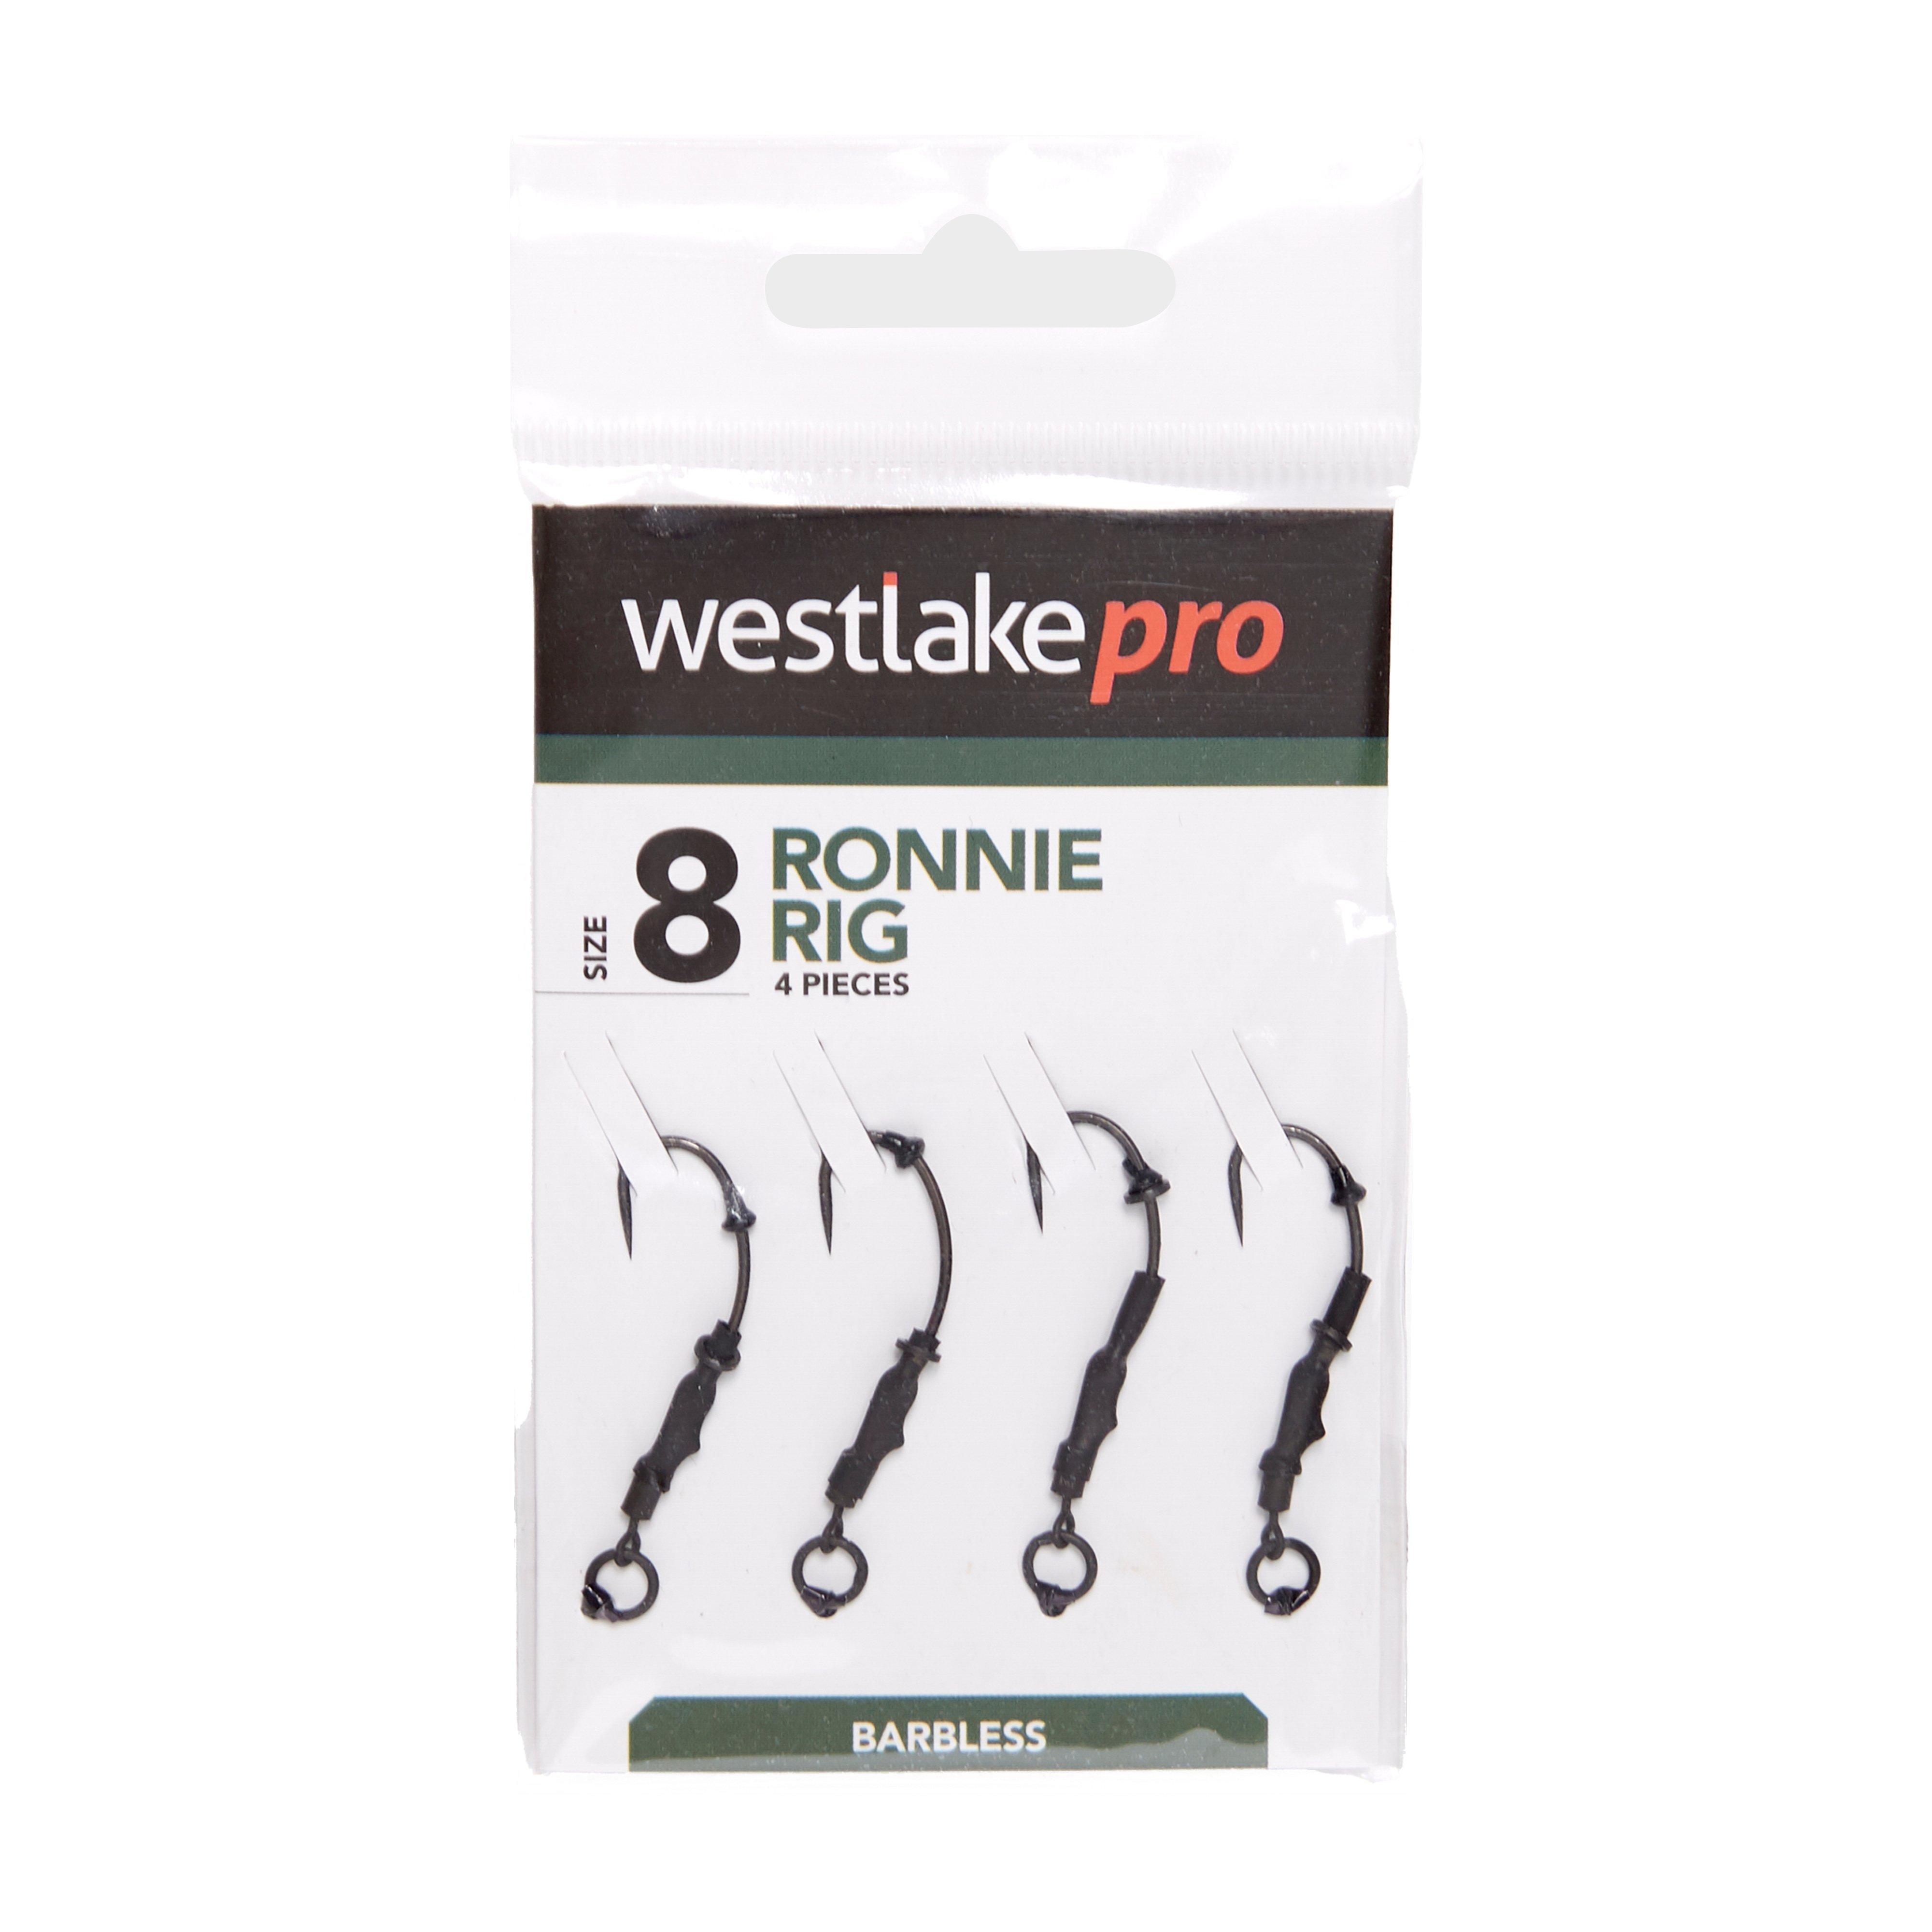 Westlake Ronnie Rig Size 8 Bless 4Pk Review